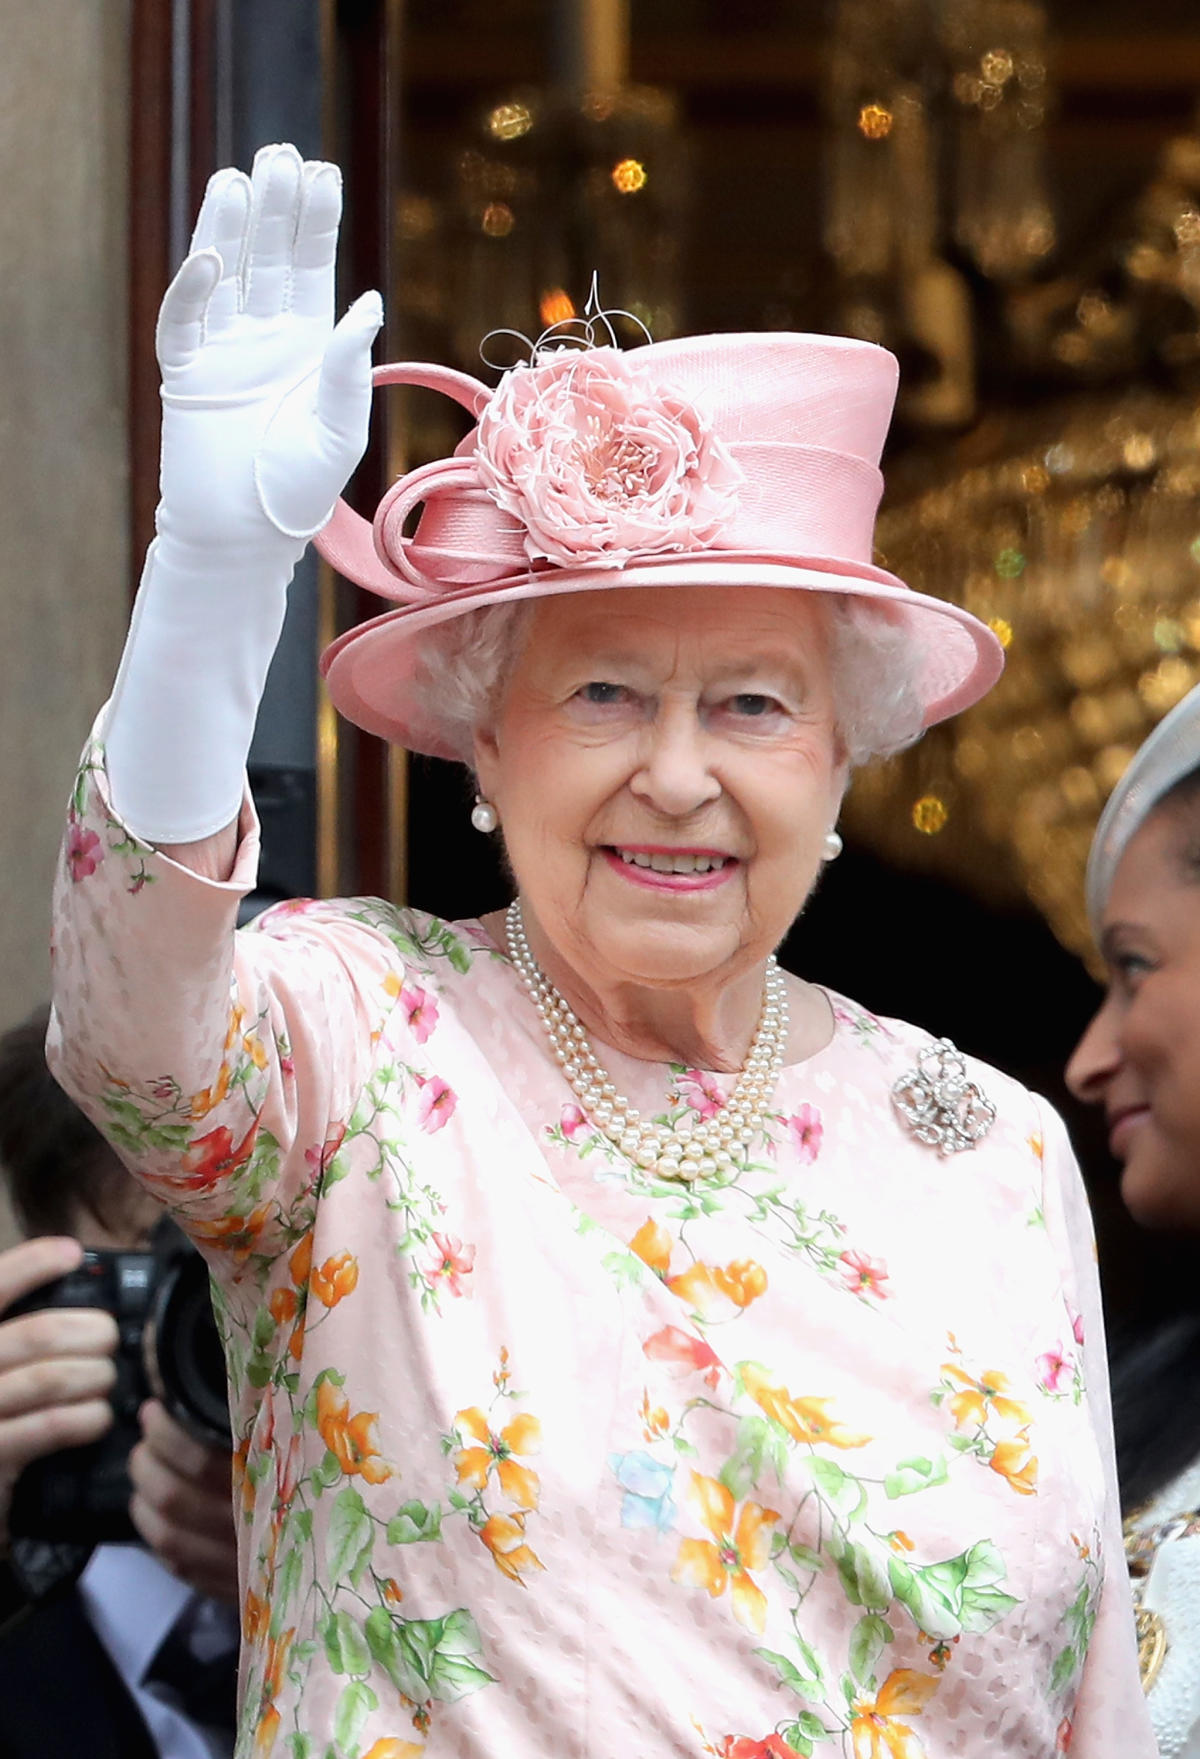 The Queen has a fake hand for waving to her fans